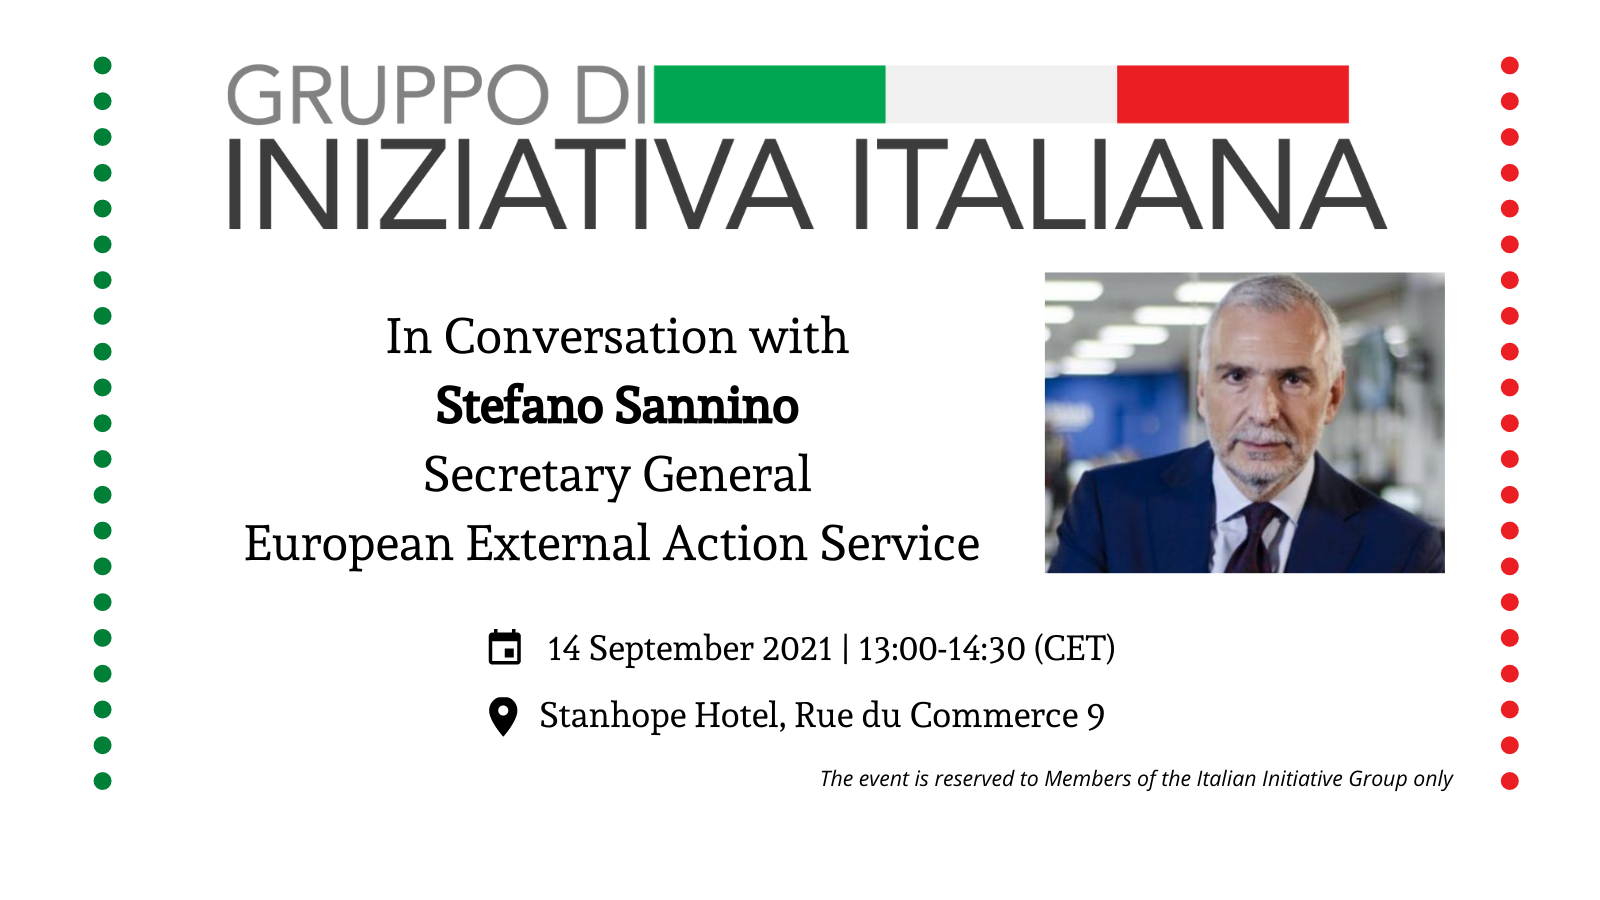 In Conversation with Stefano Sannino | Secretary General of the European External Action Service (EEAS)